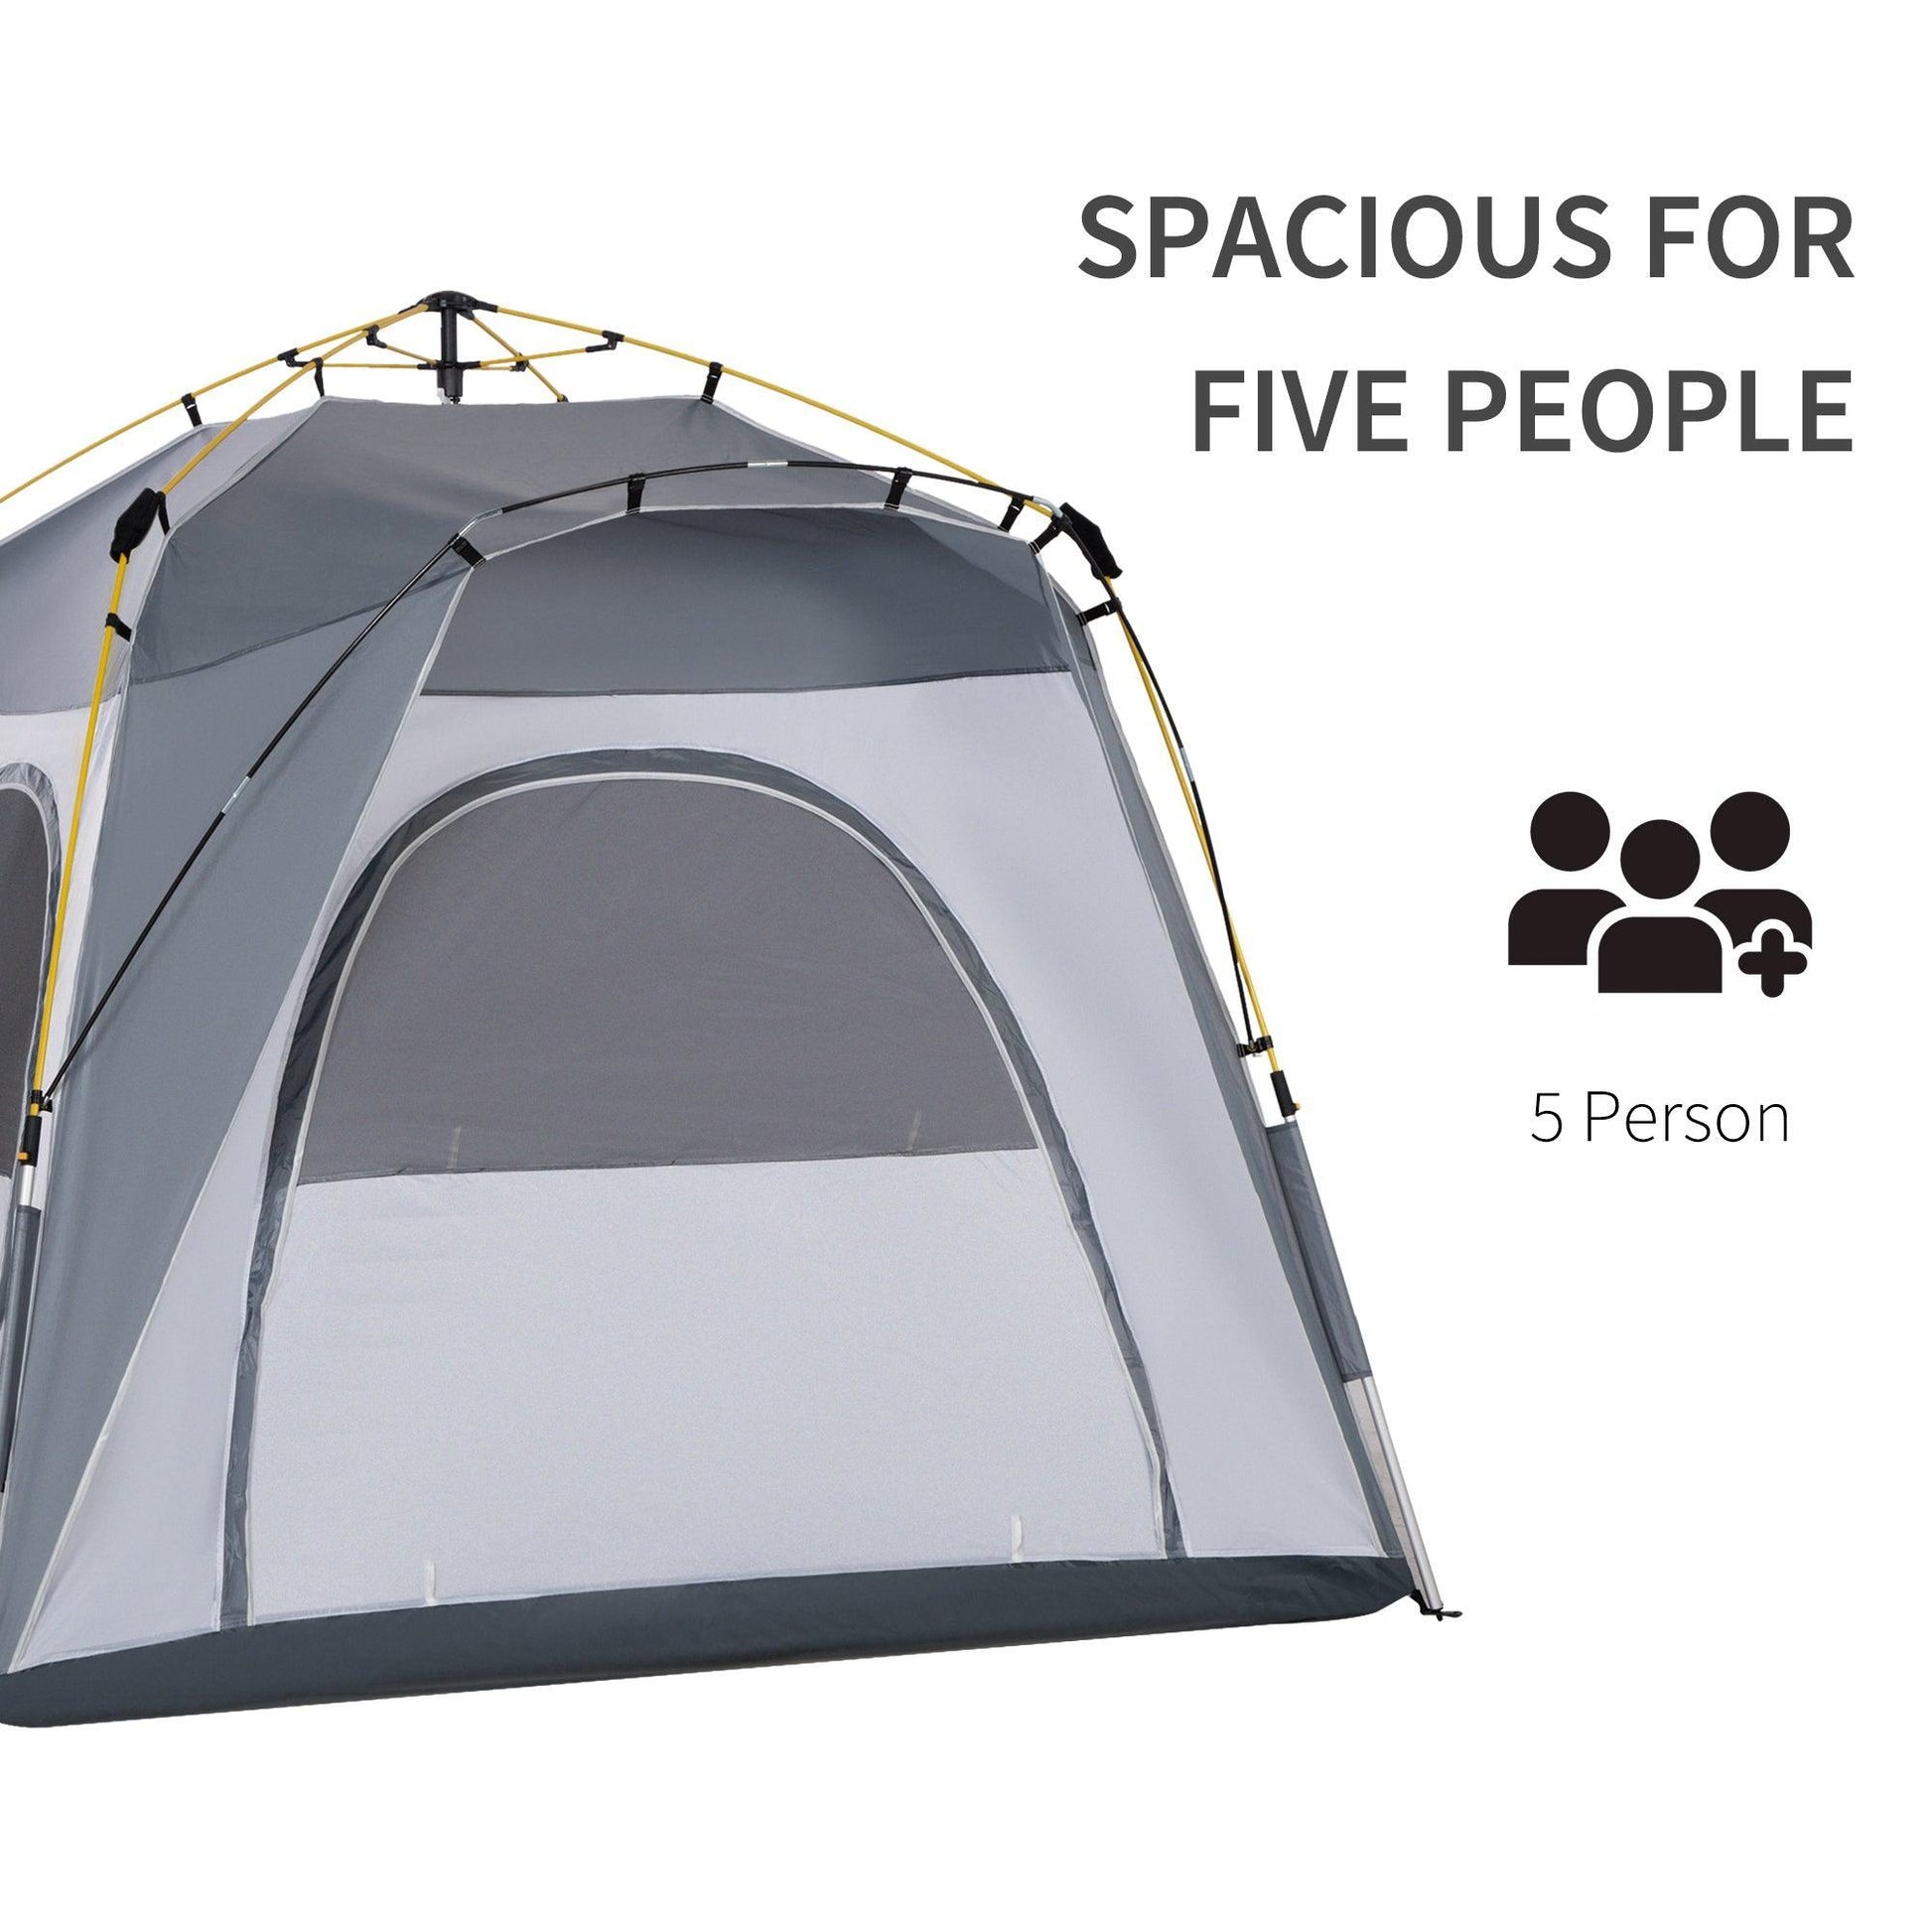 Outsunny Camping Tent: 4-Person Auto Pop-Up, Lightweight & Portable - ALL4U RETAILER LTD